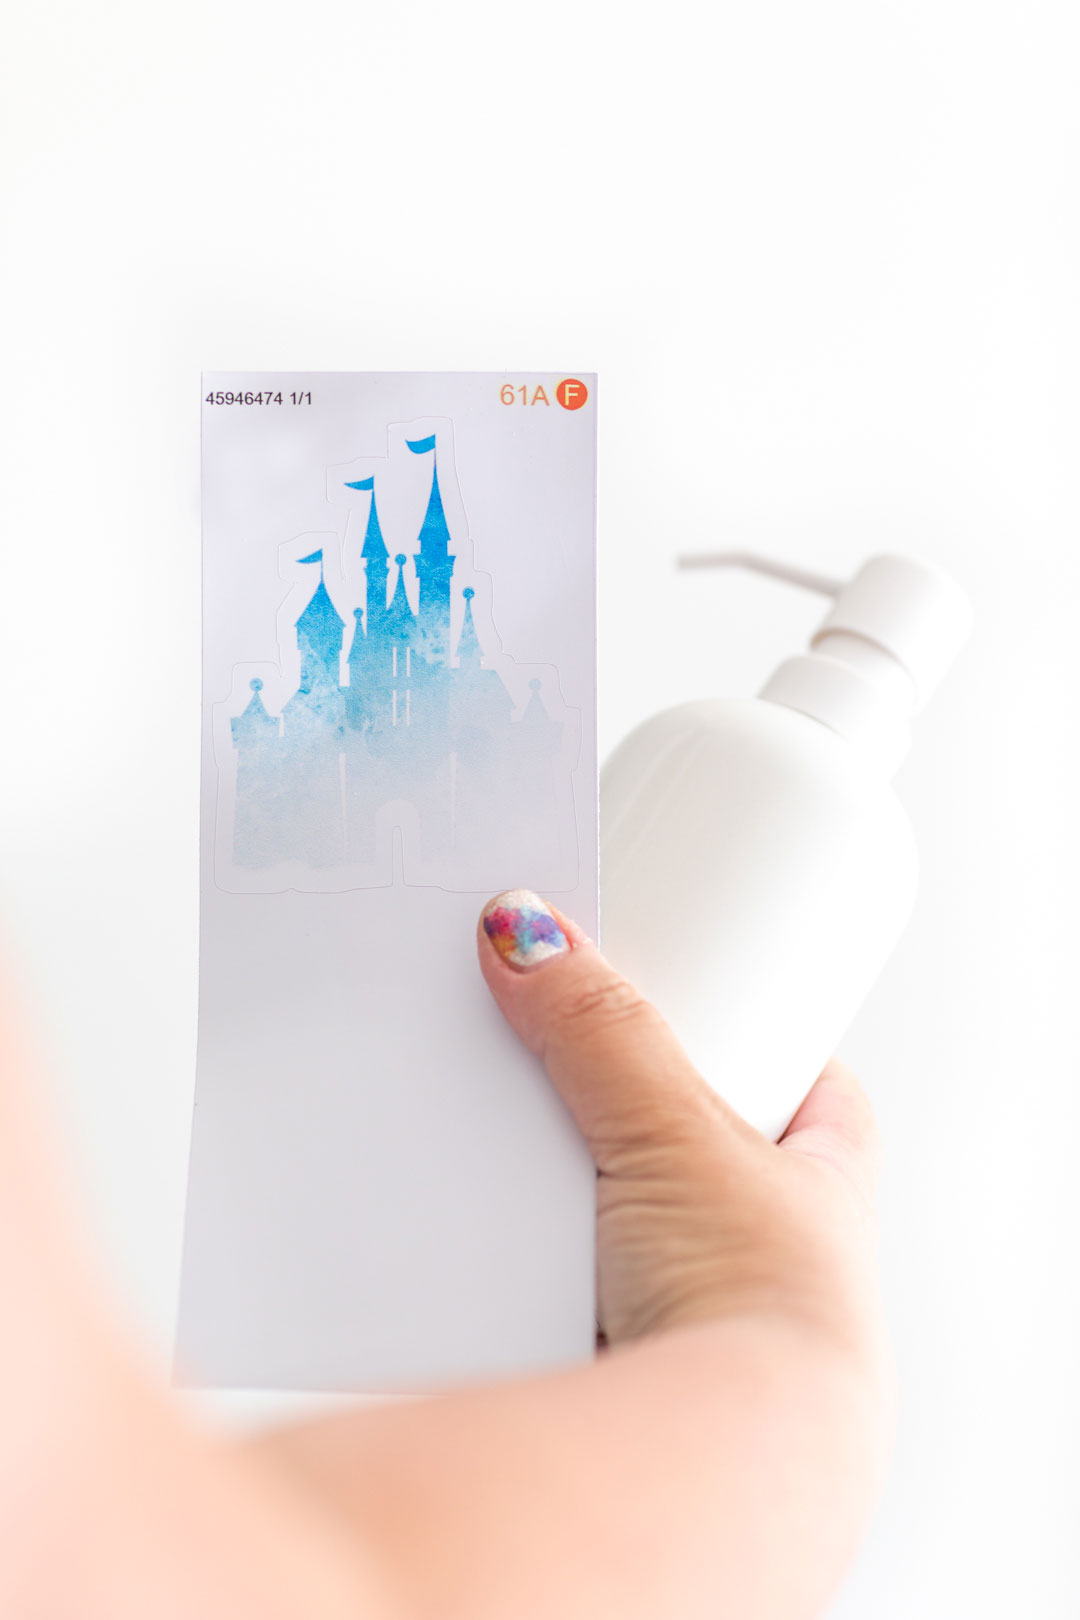 Giving a soap dispenser a makeover with a disney castle inspired sticker from redbubble.